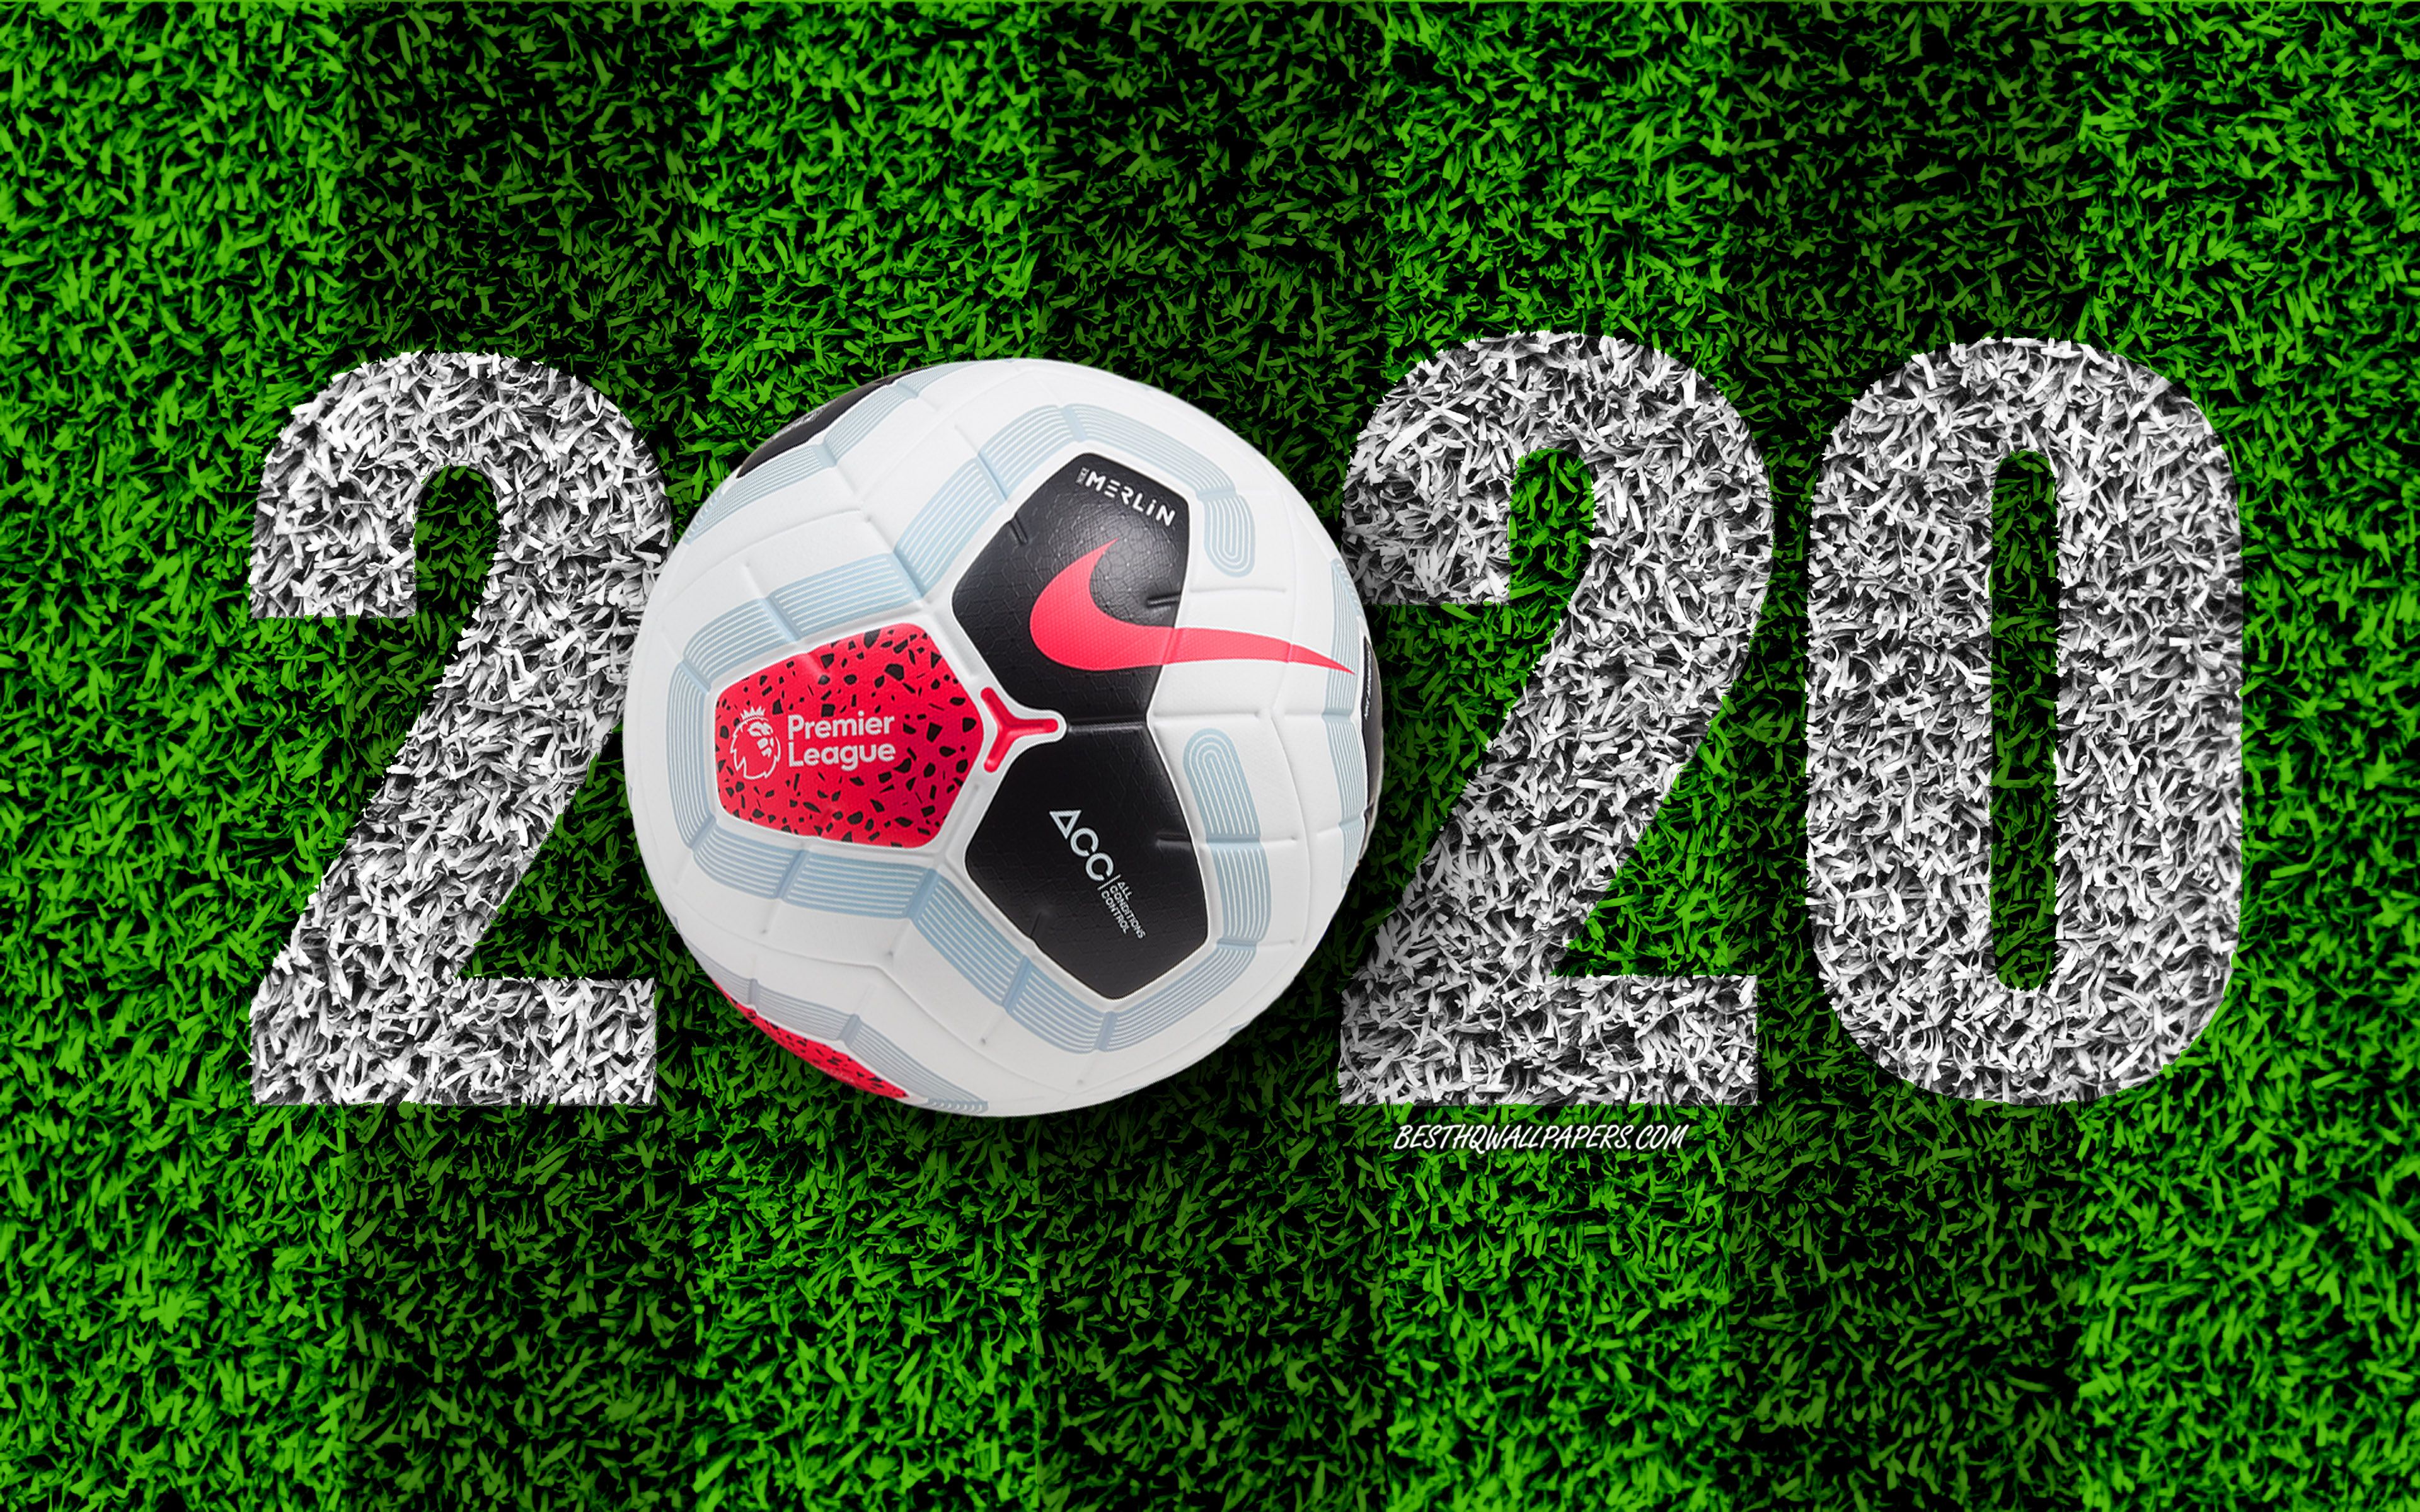 Download wallpaper Nike Merlin, 2020 concepts, official Premier League 2020 ball, England, football, premier league 2019 20 ball, 20th Premier League season for desktop with resolution 3840x2400. High Quality HD picture wallpaper